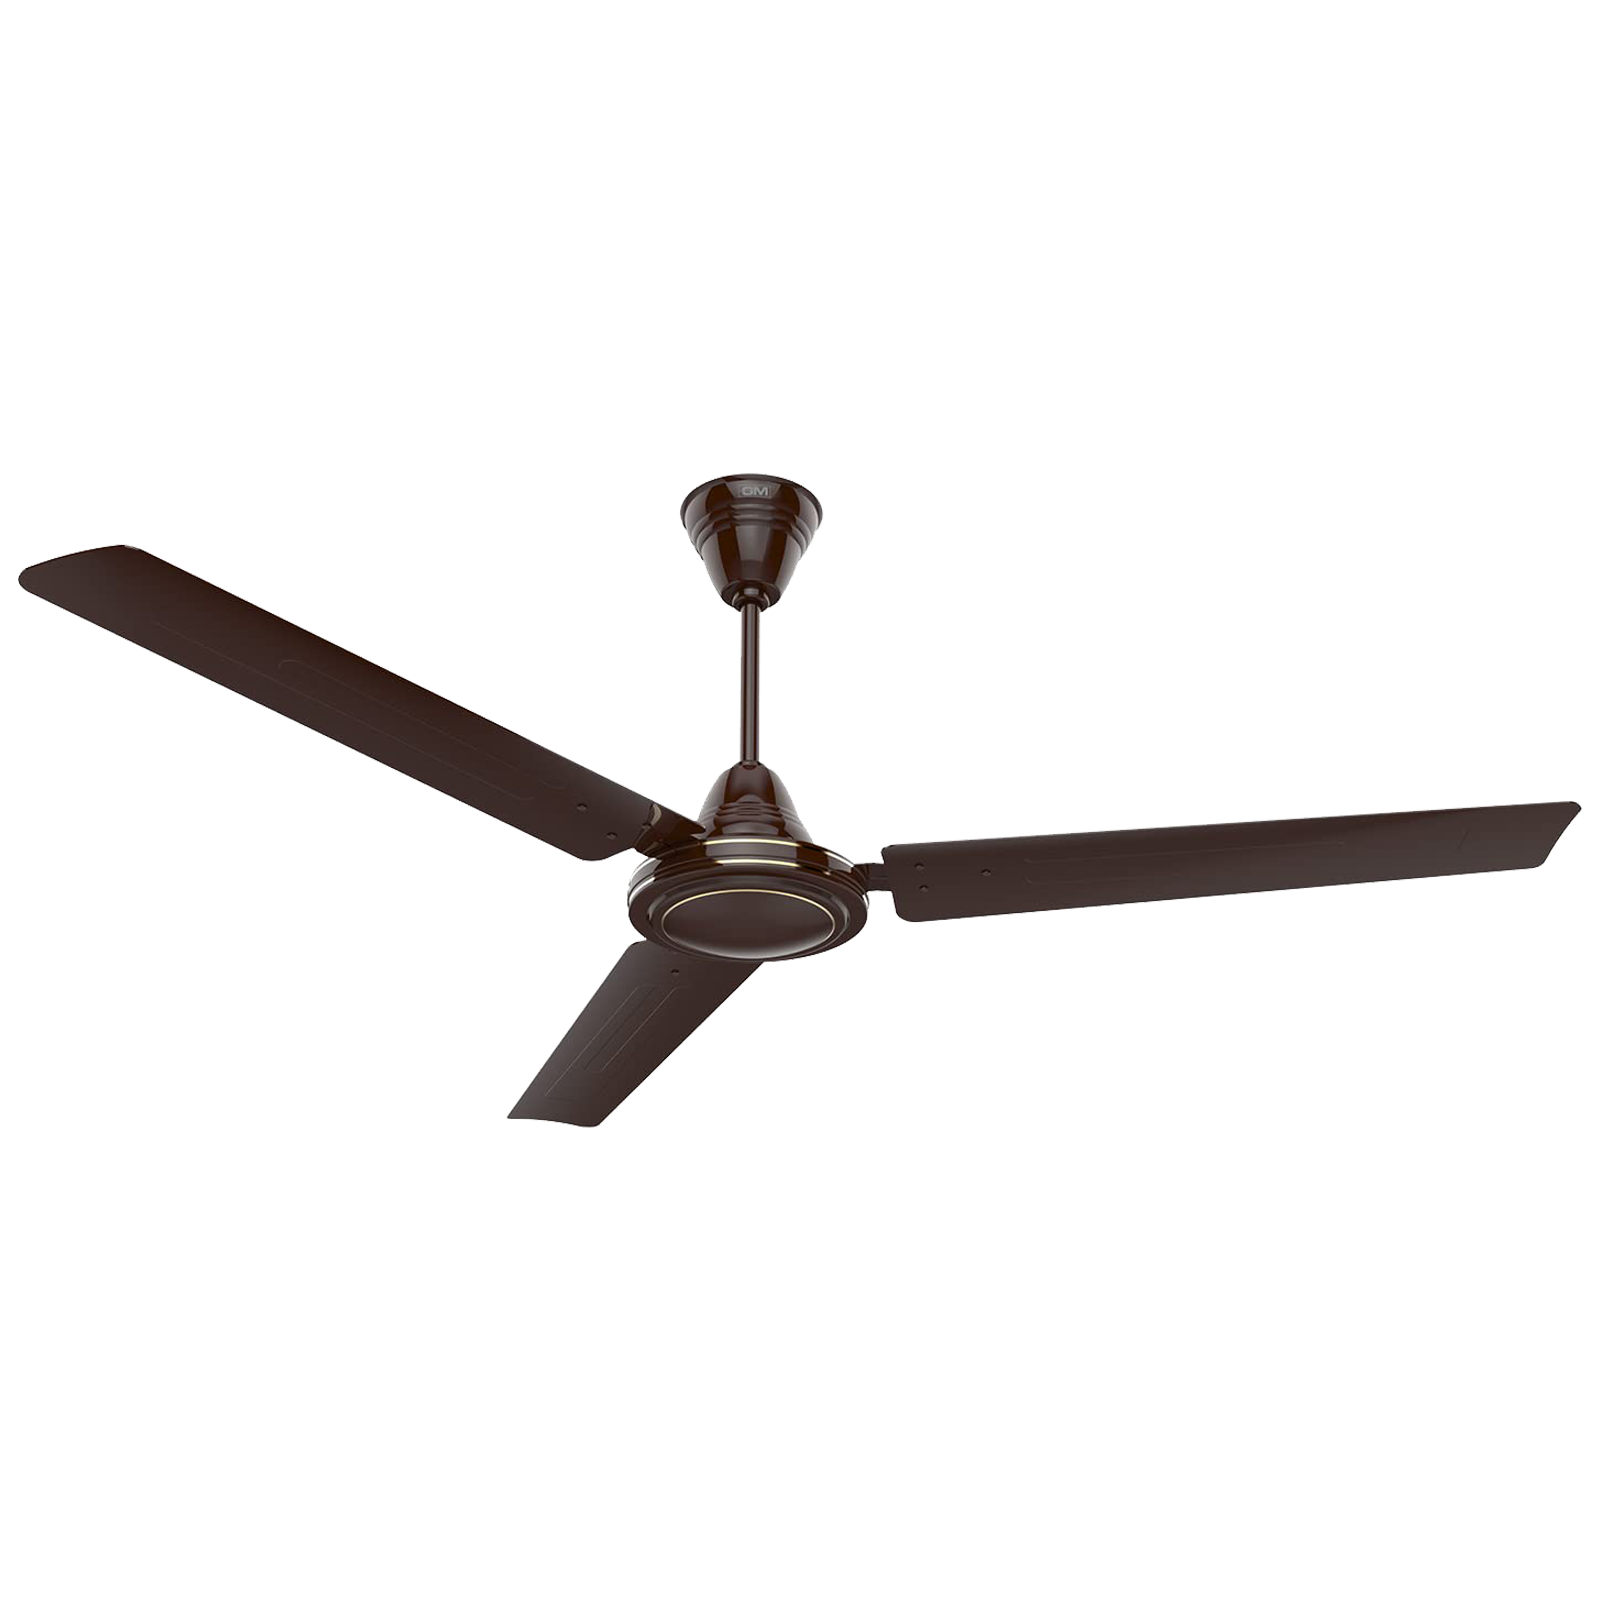 Buy Airflow Fans Online at Best Prices